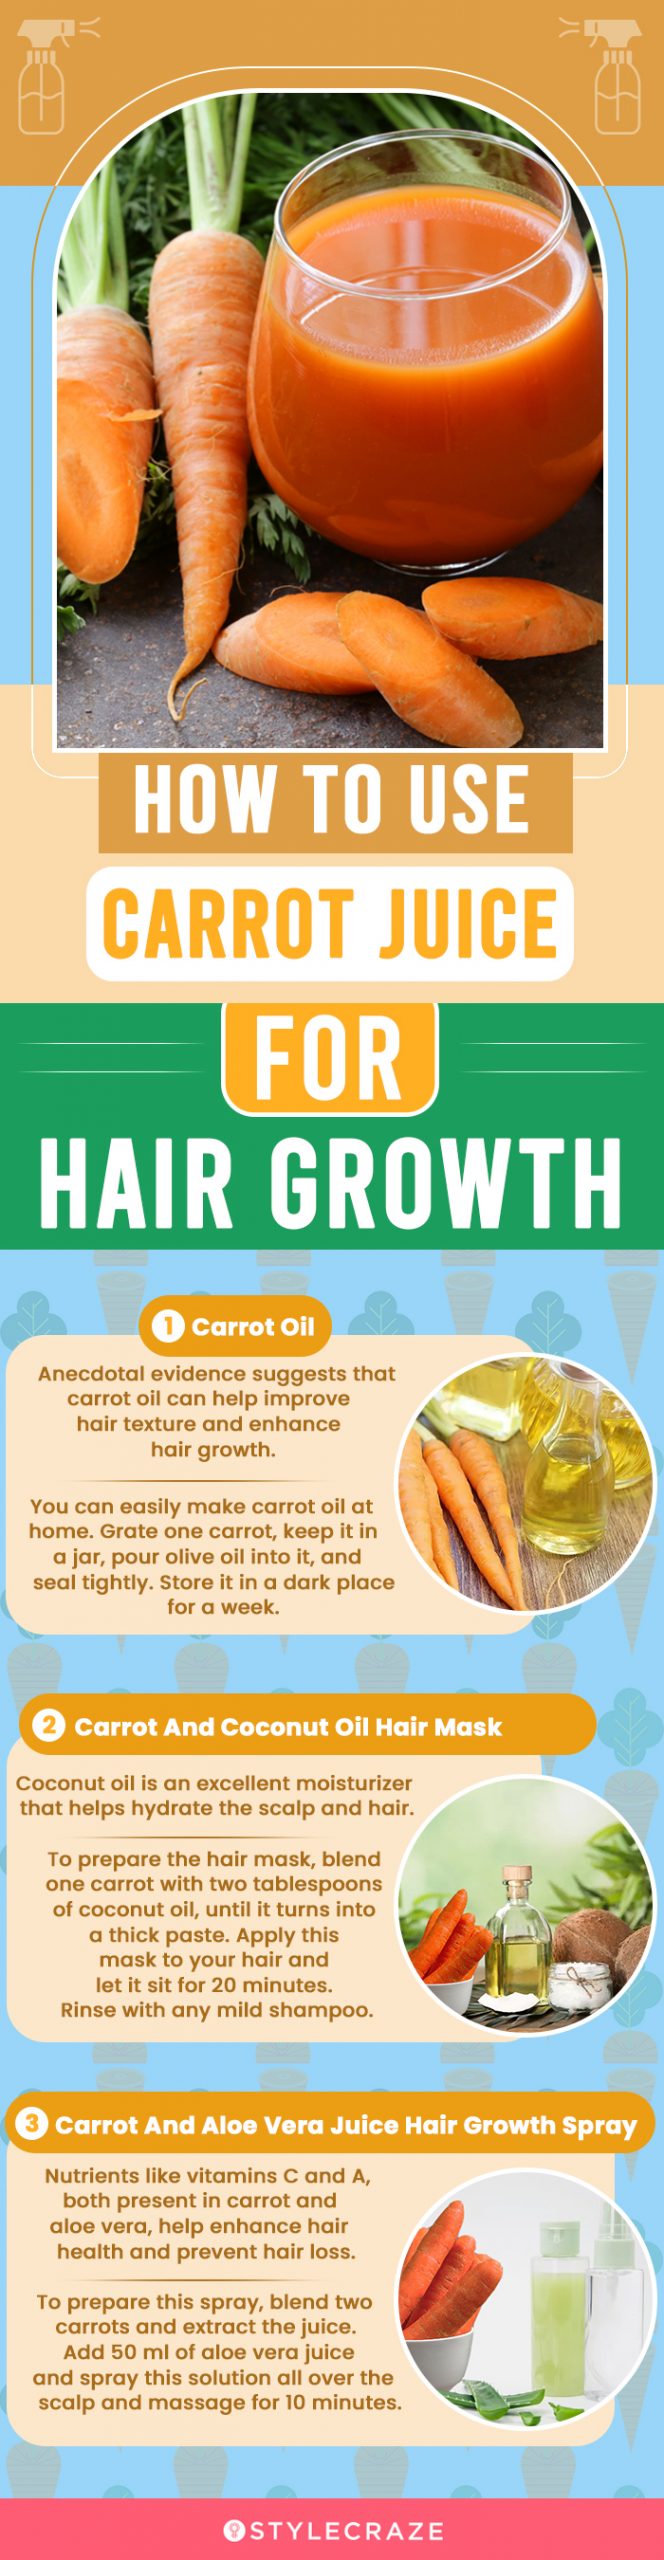 How To Use Carrots For Hair Growth - Oil, Masks and Spray